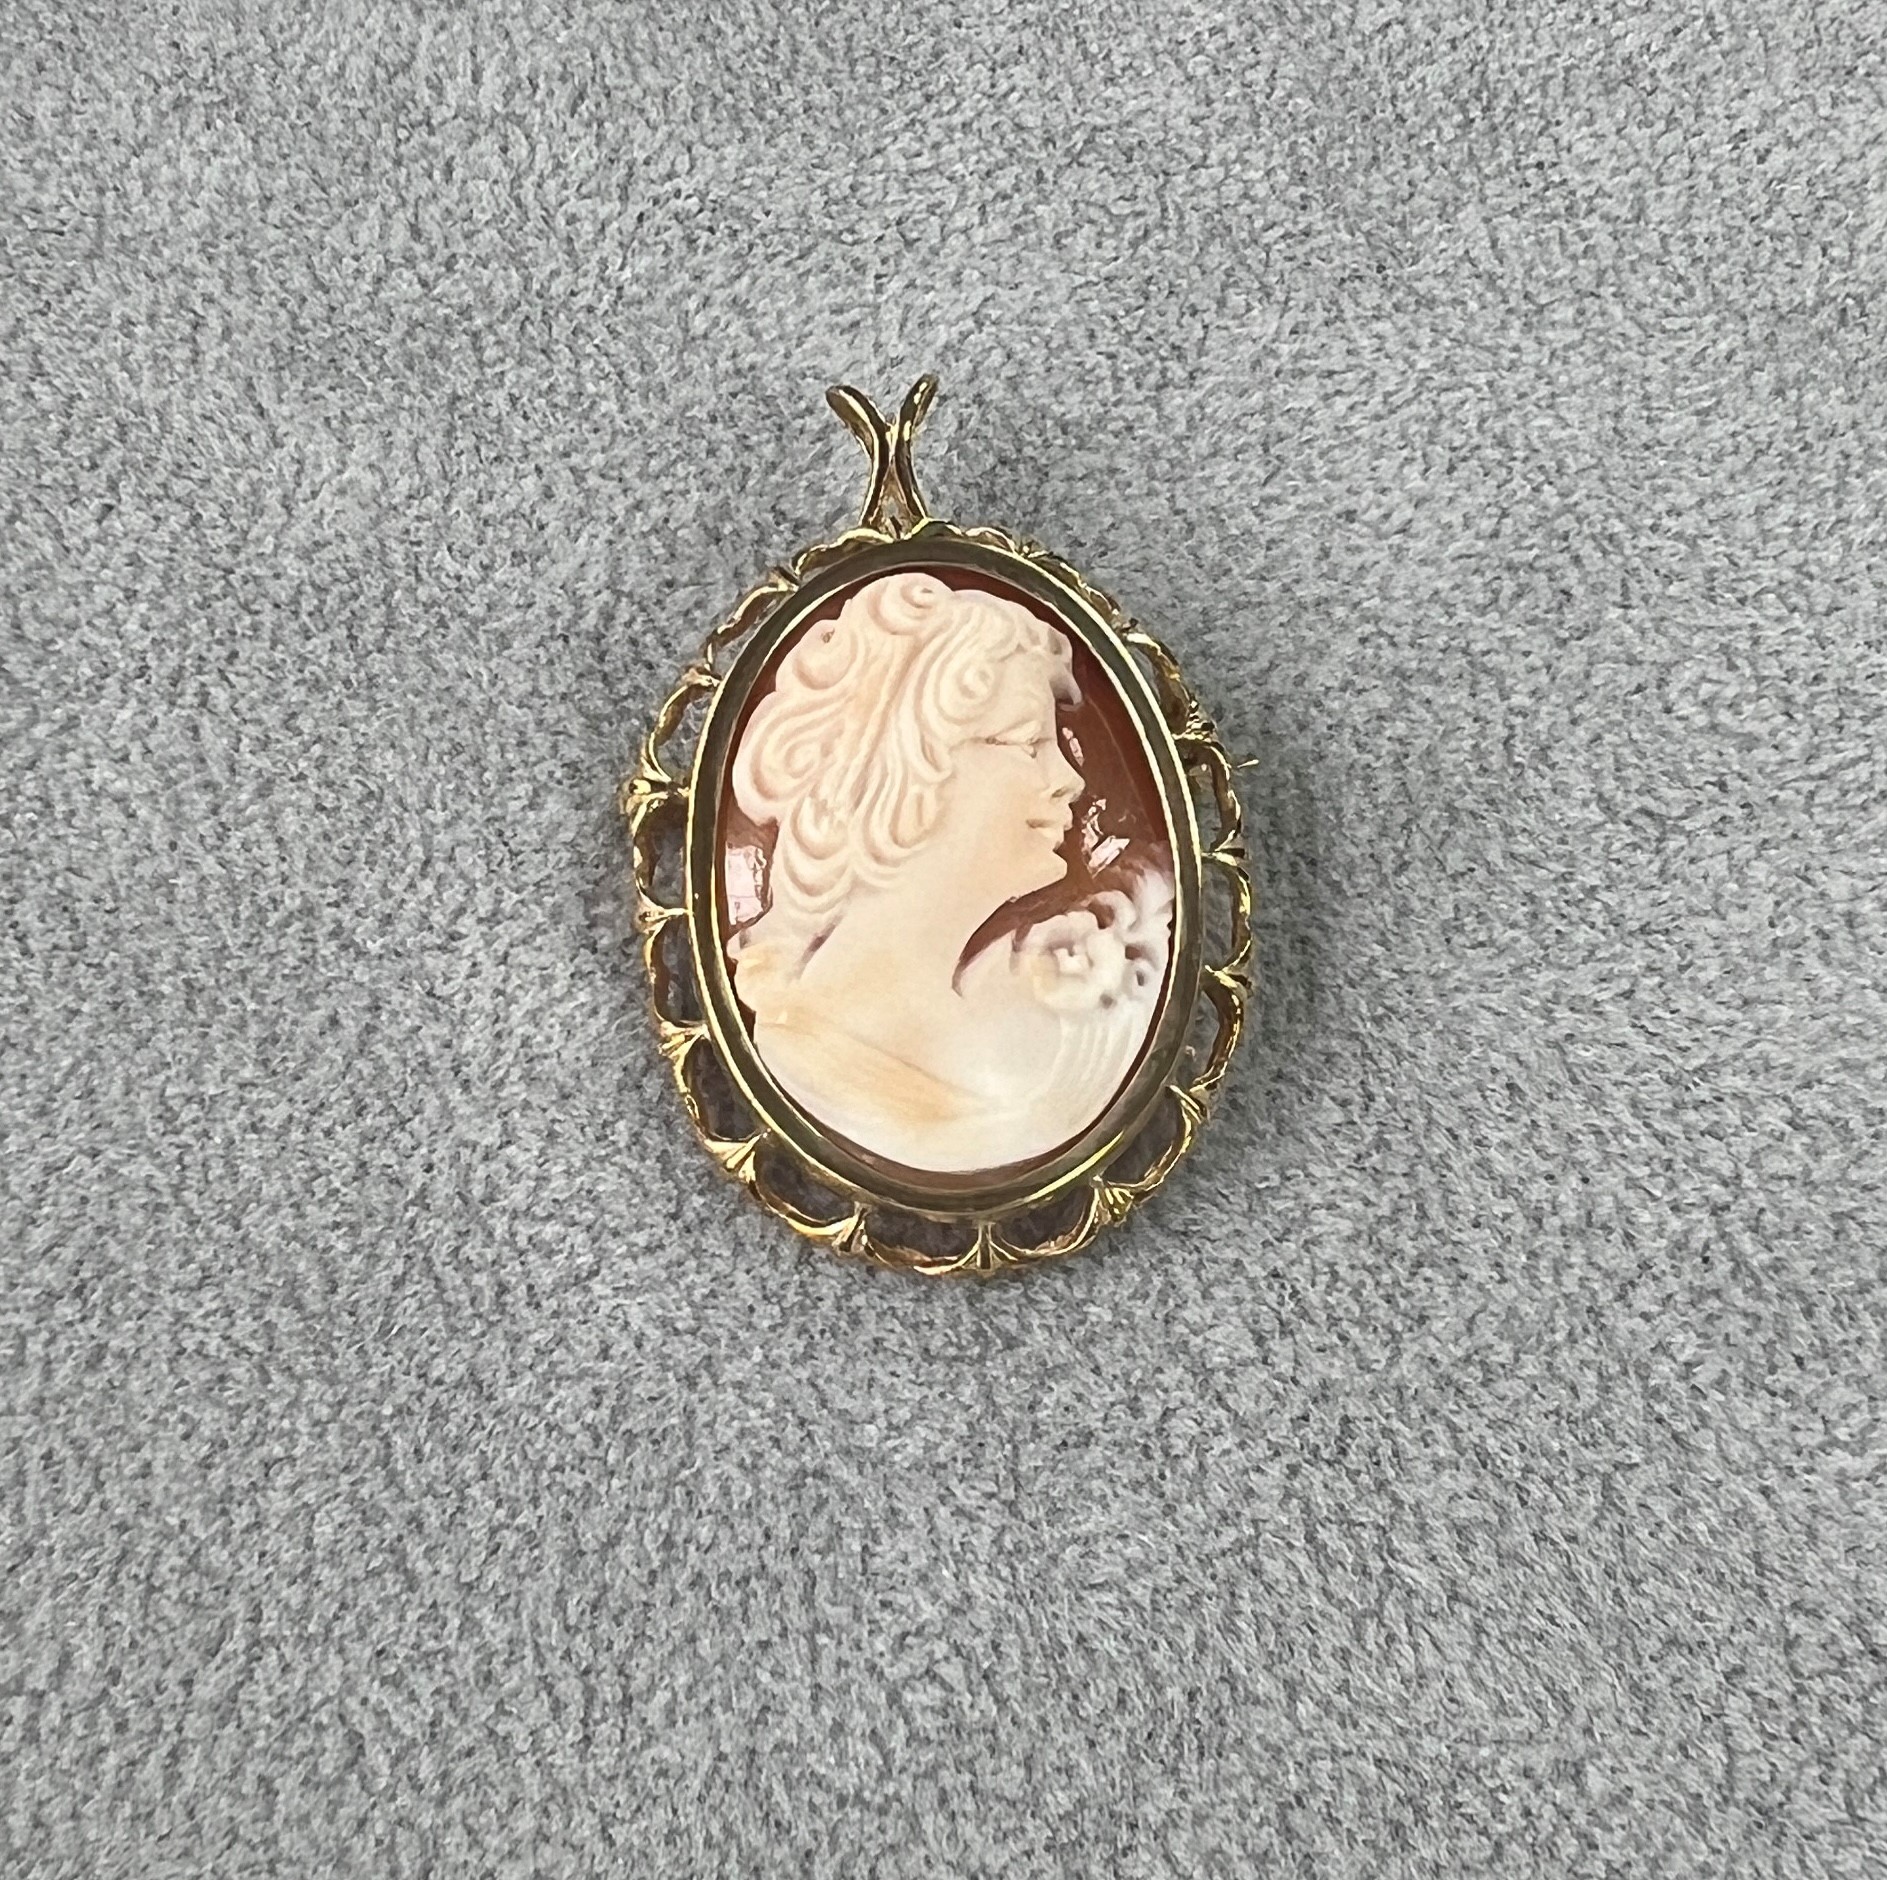 9ct yellow gold hand carved italian cameo shell brooch Cameo shell 28.50 x 21.00mm depicting